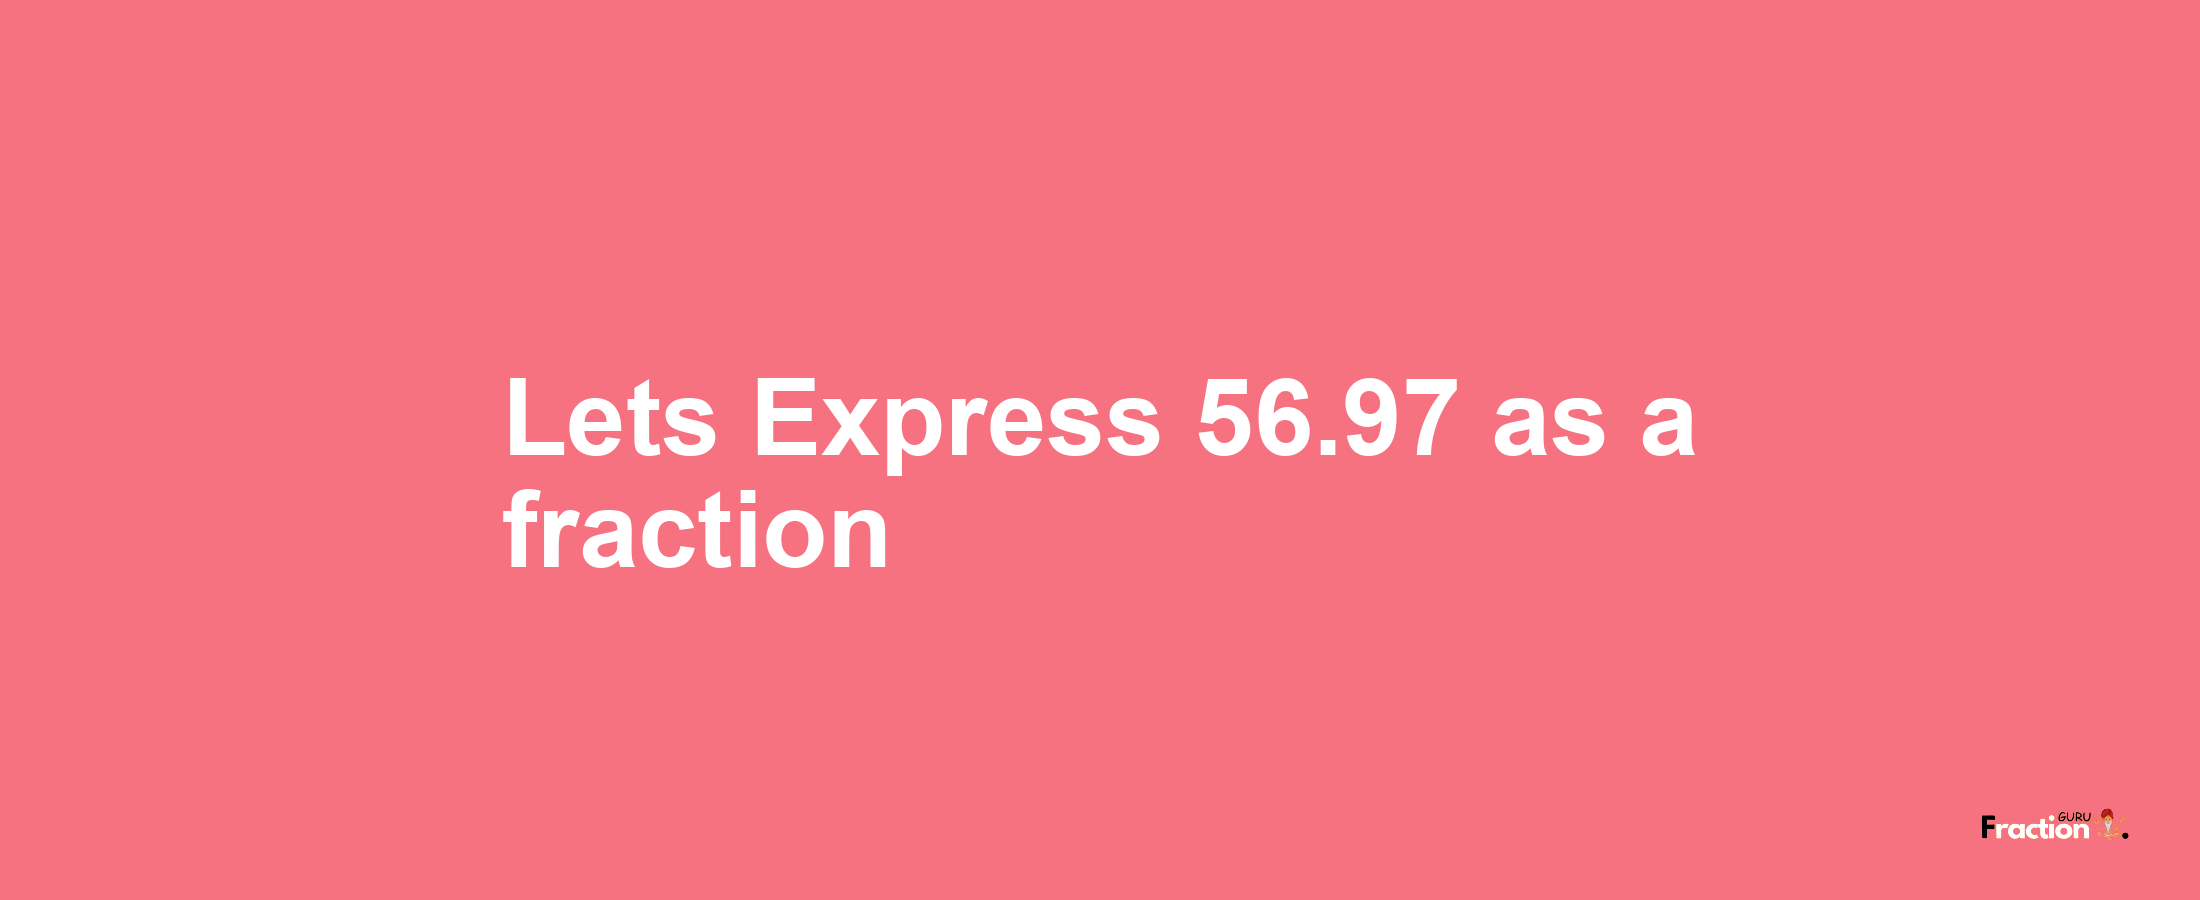 Lets Express 56.97 as afraction